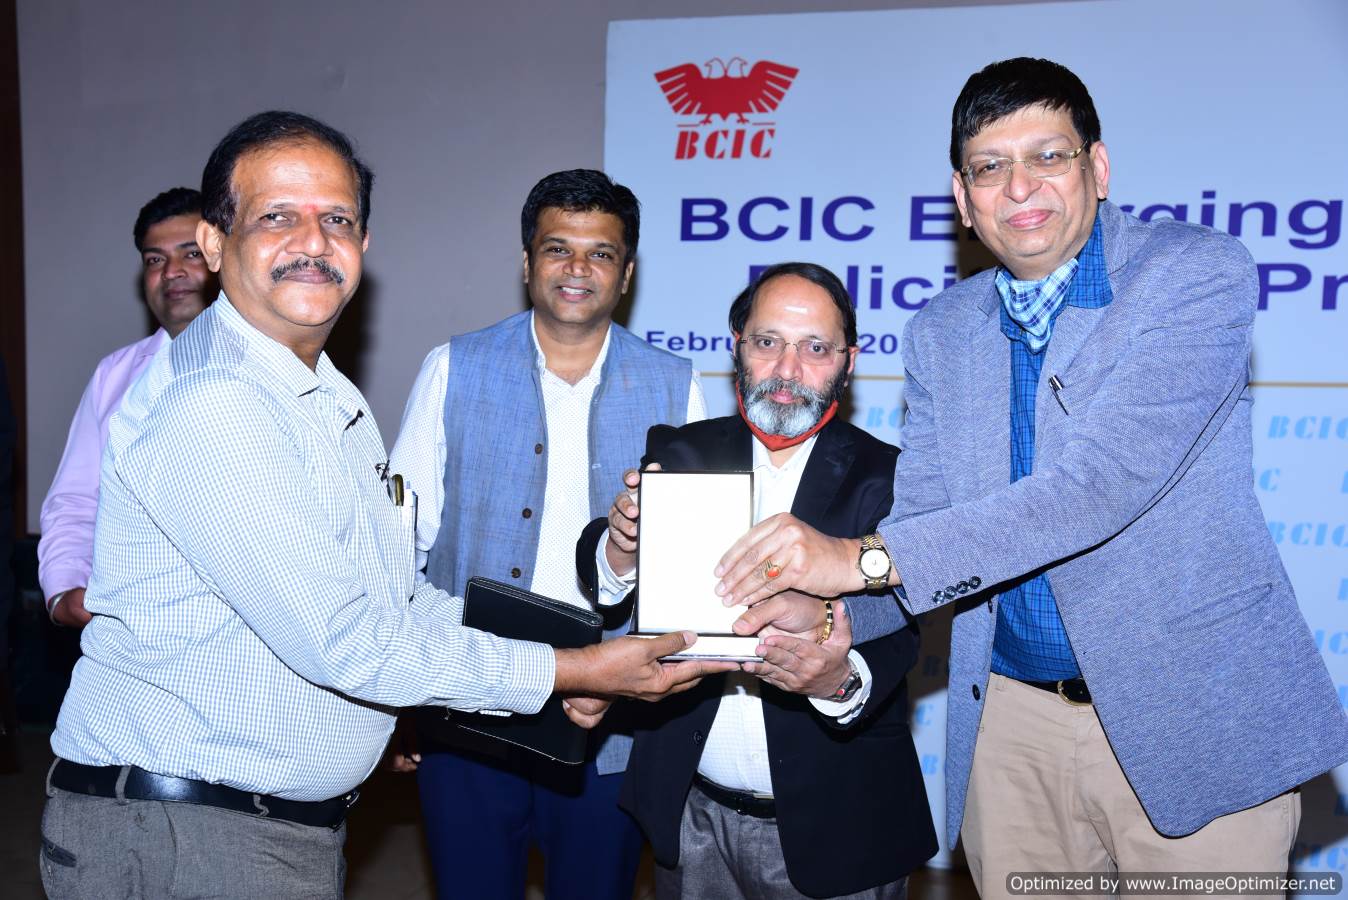 Bcic-awards-gallery-image-17